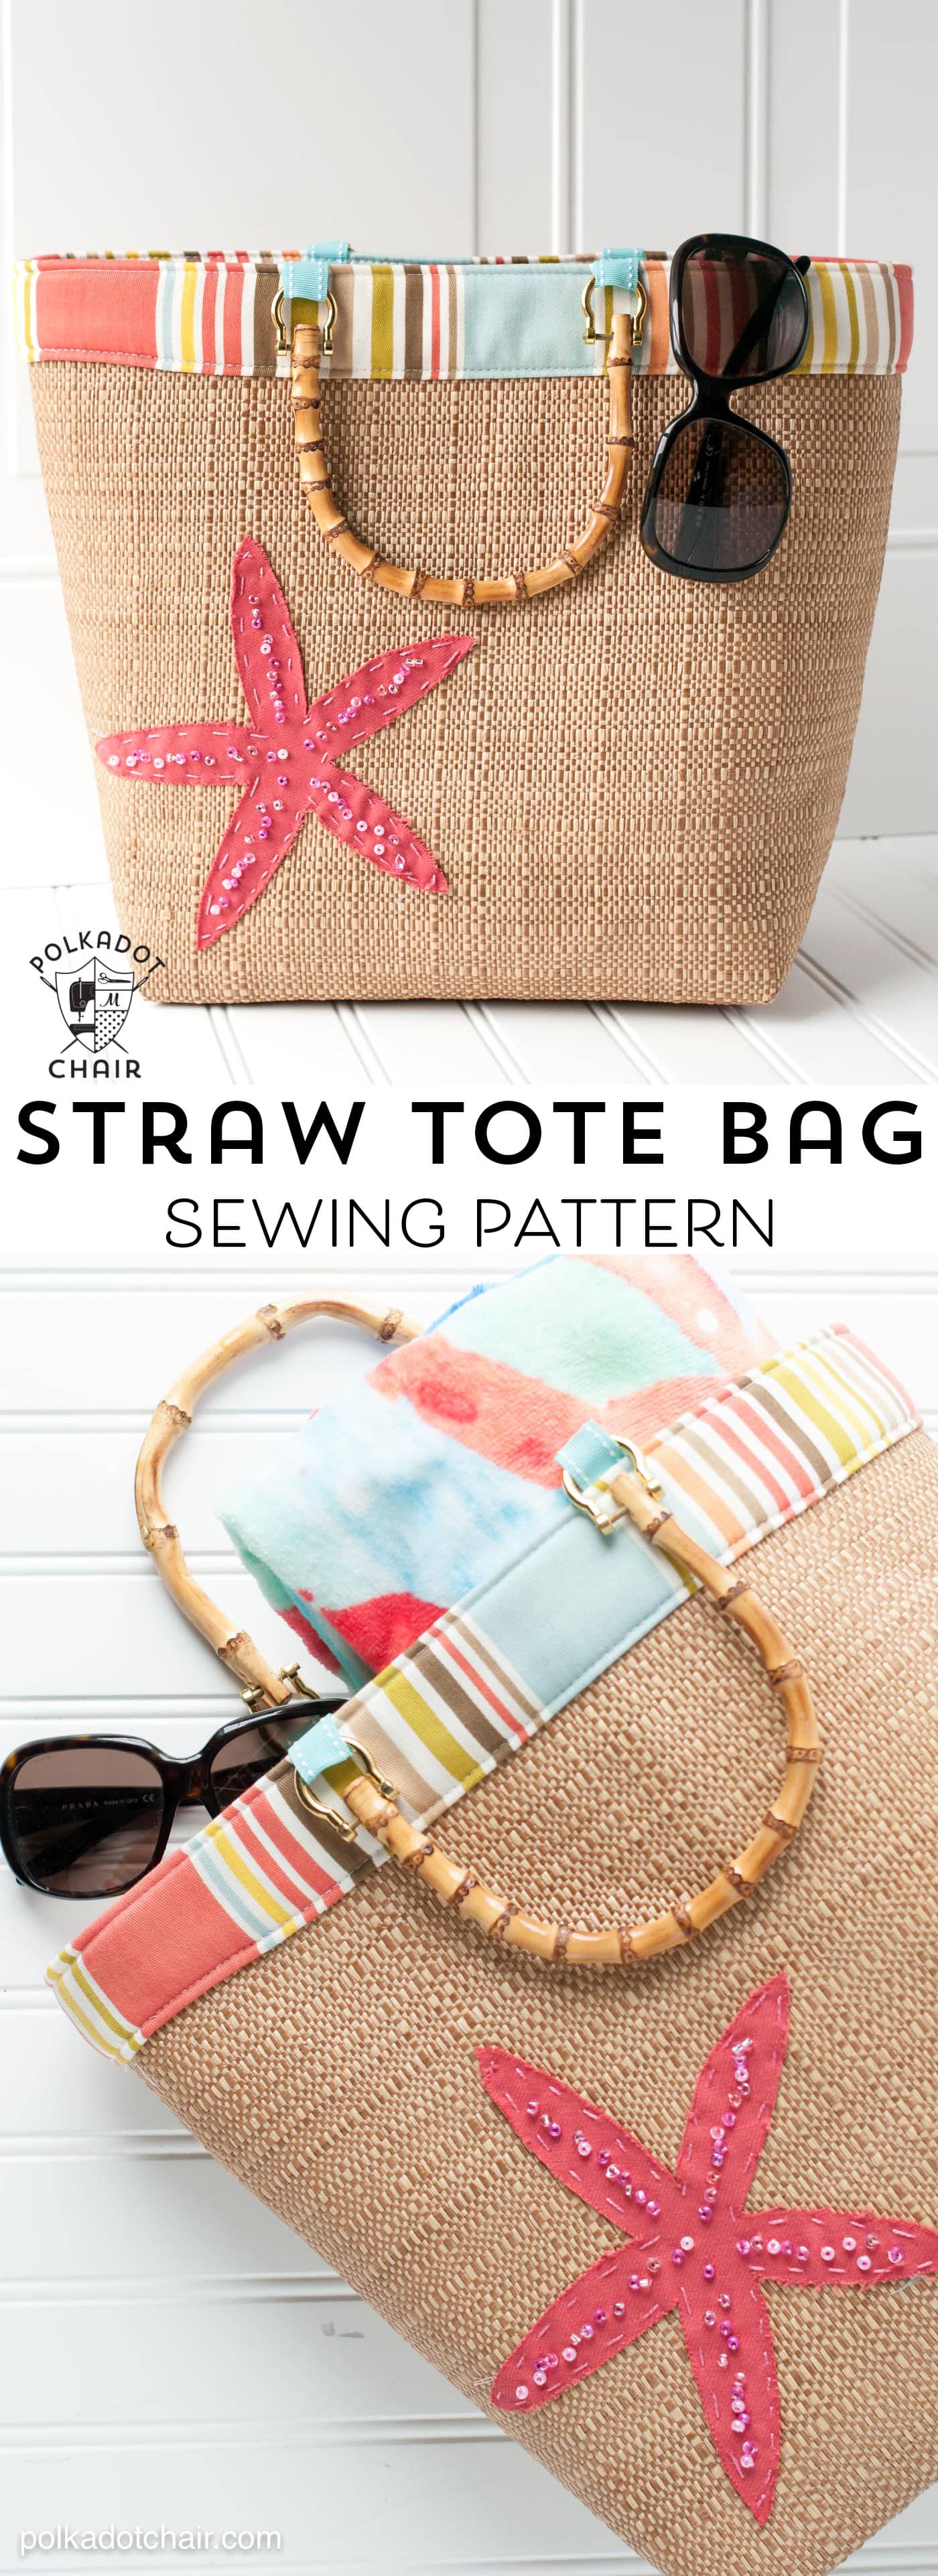 Free Sewing Pattern for a Straw Tote Bag - cute summer bag pattern! 